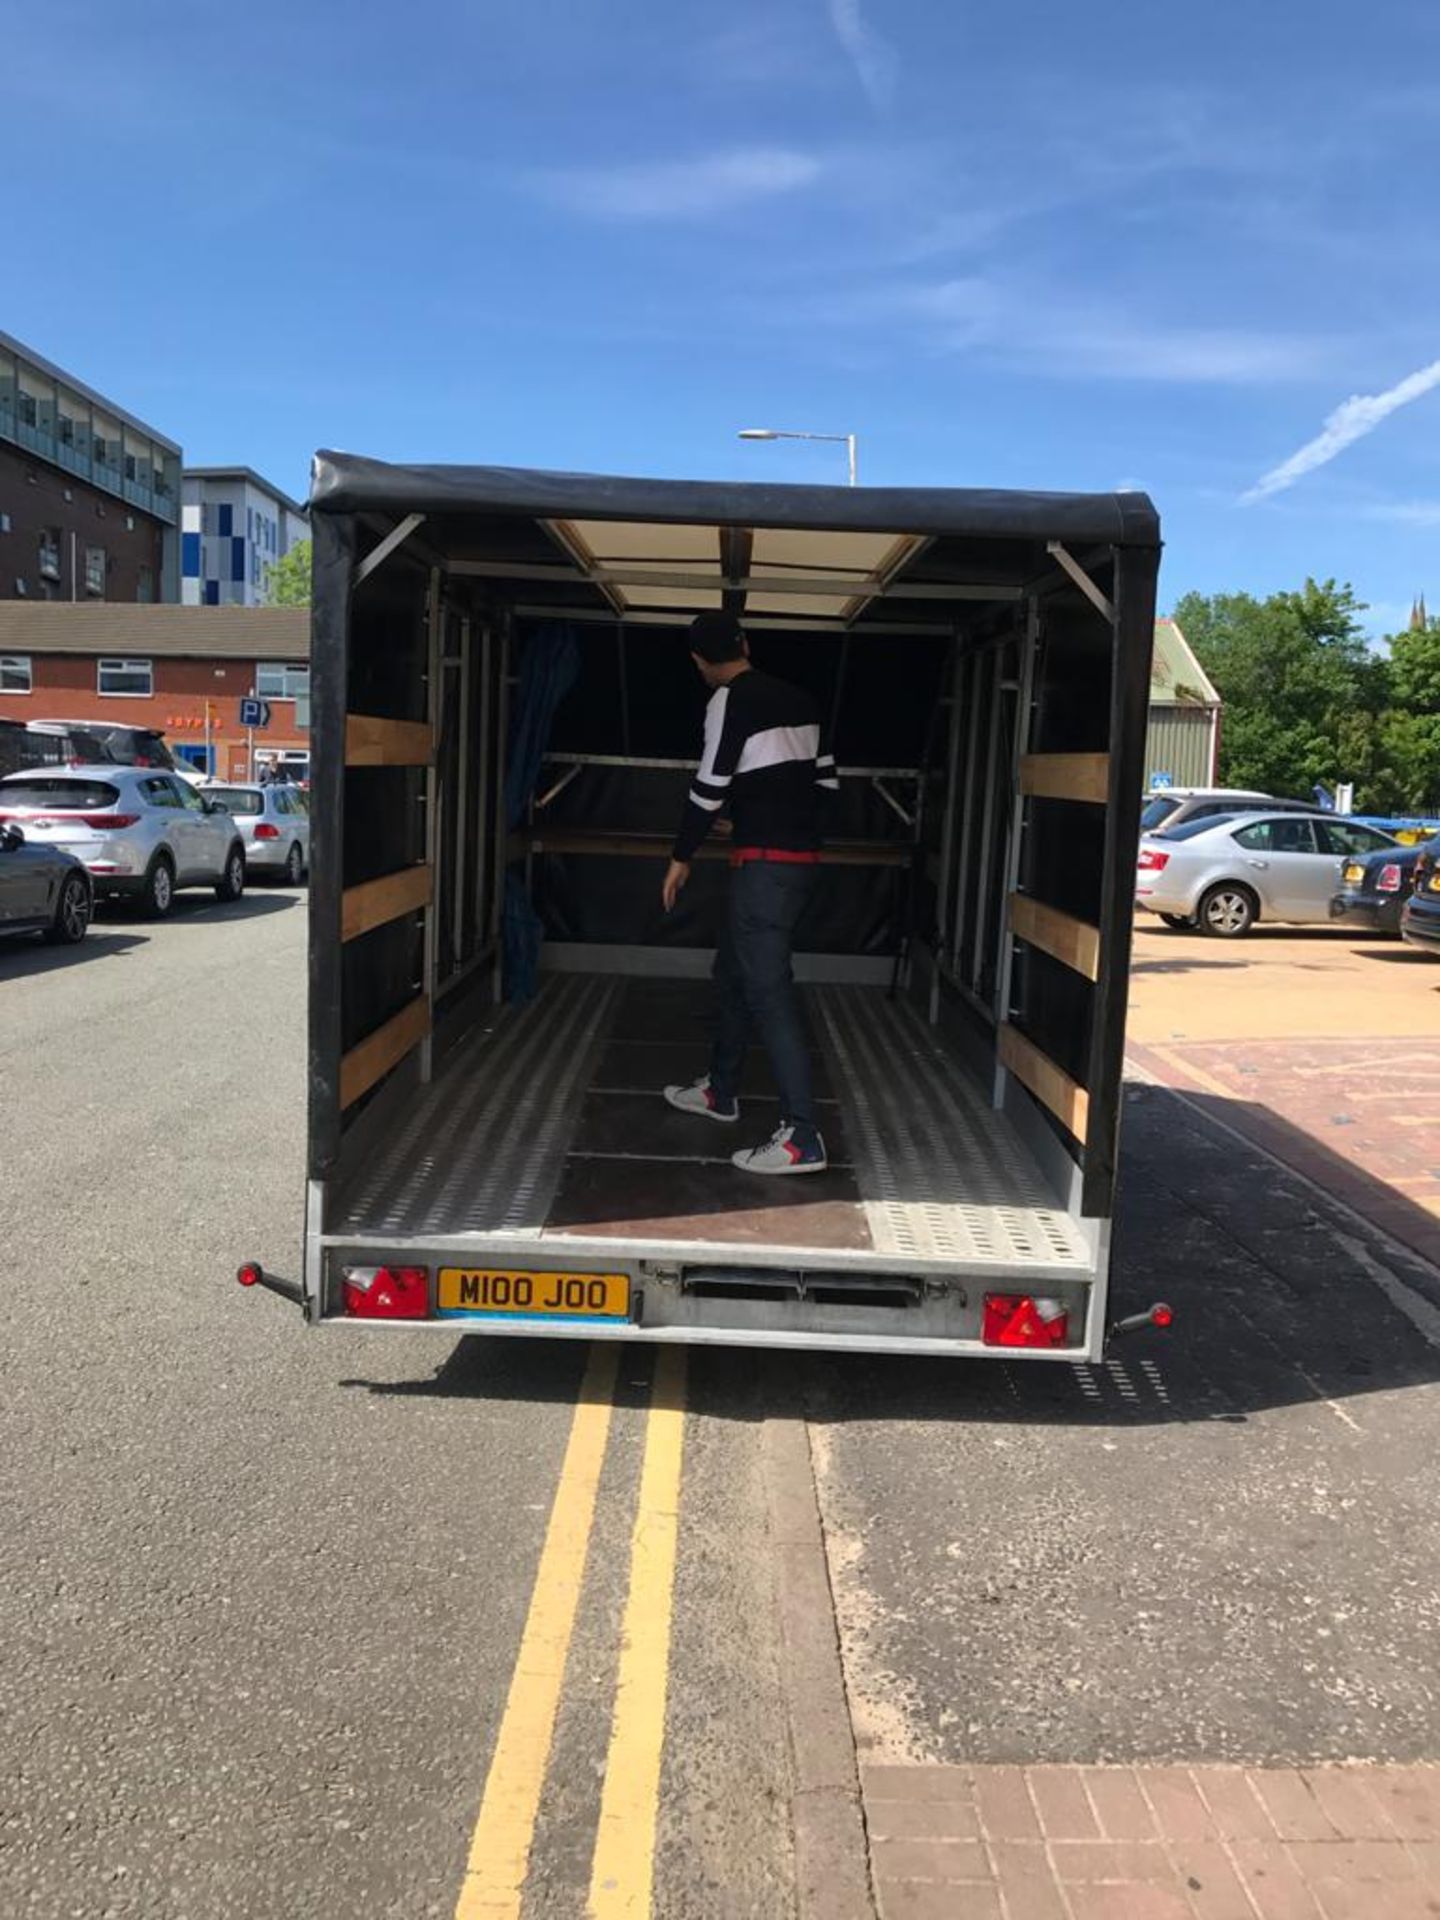 2019 Enclsosed car trailer been used for track day transporting our Lamborghini Gallardo to track - Image 3 of 8